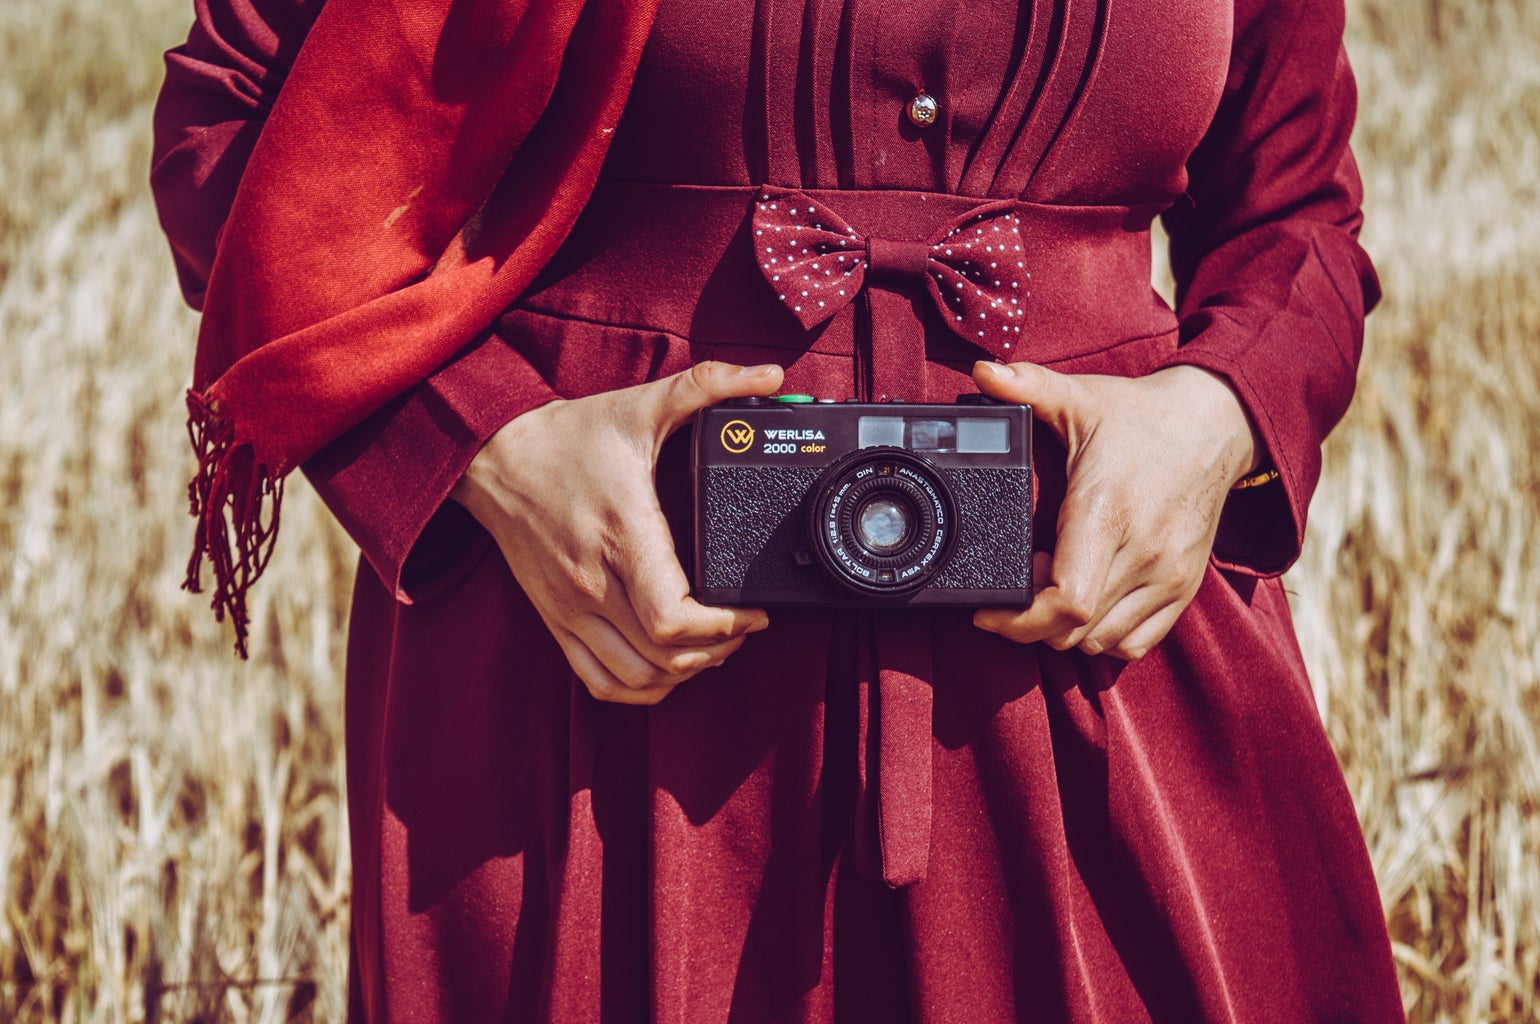 person wearing red holding camera